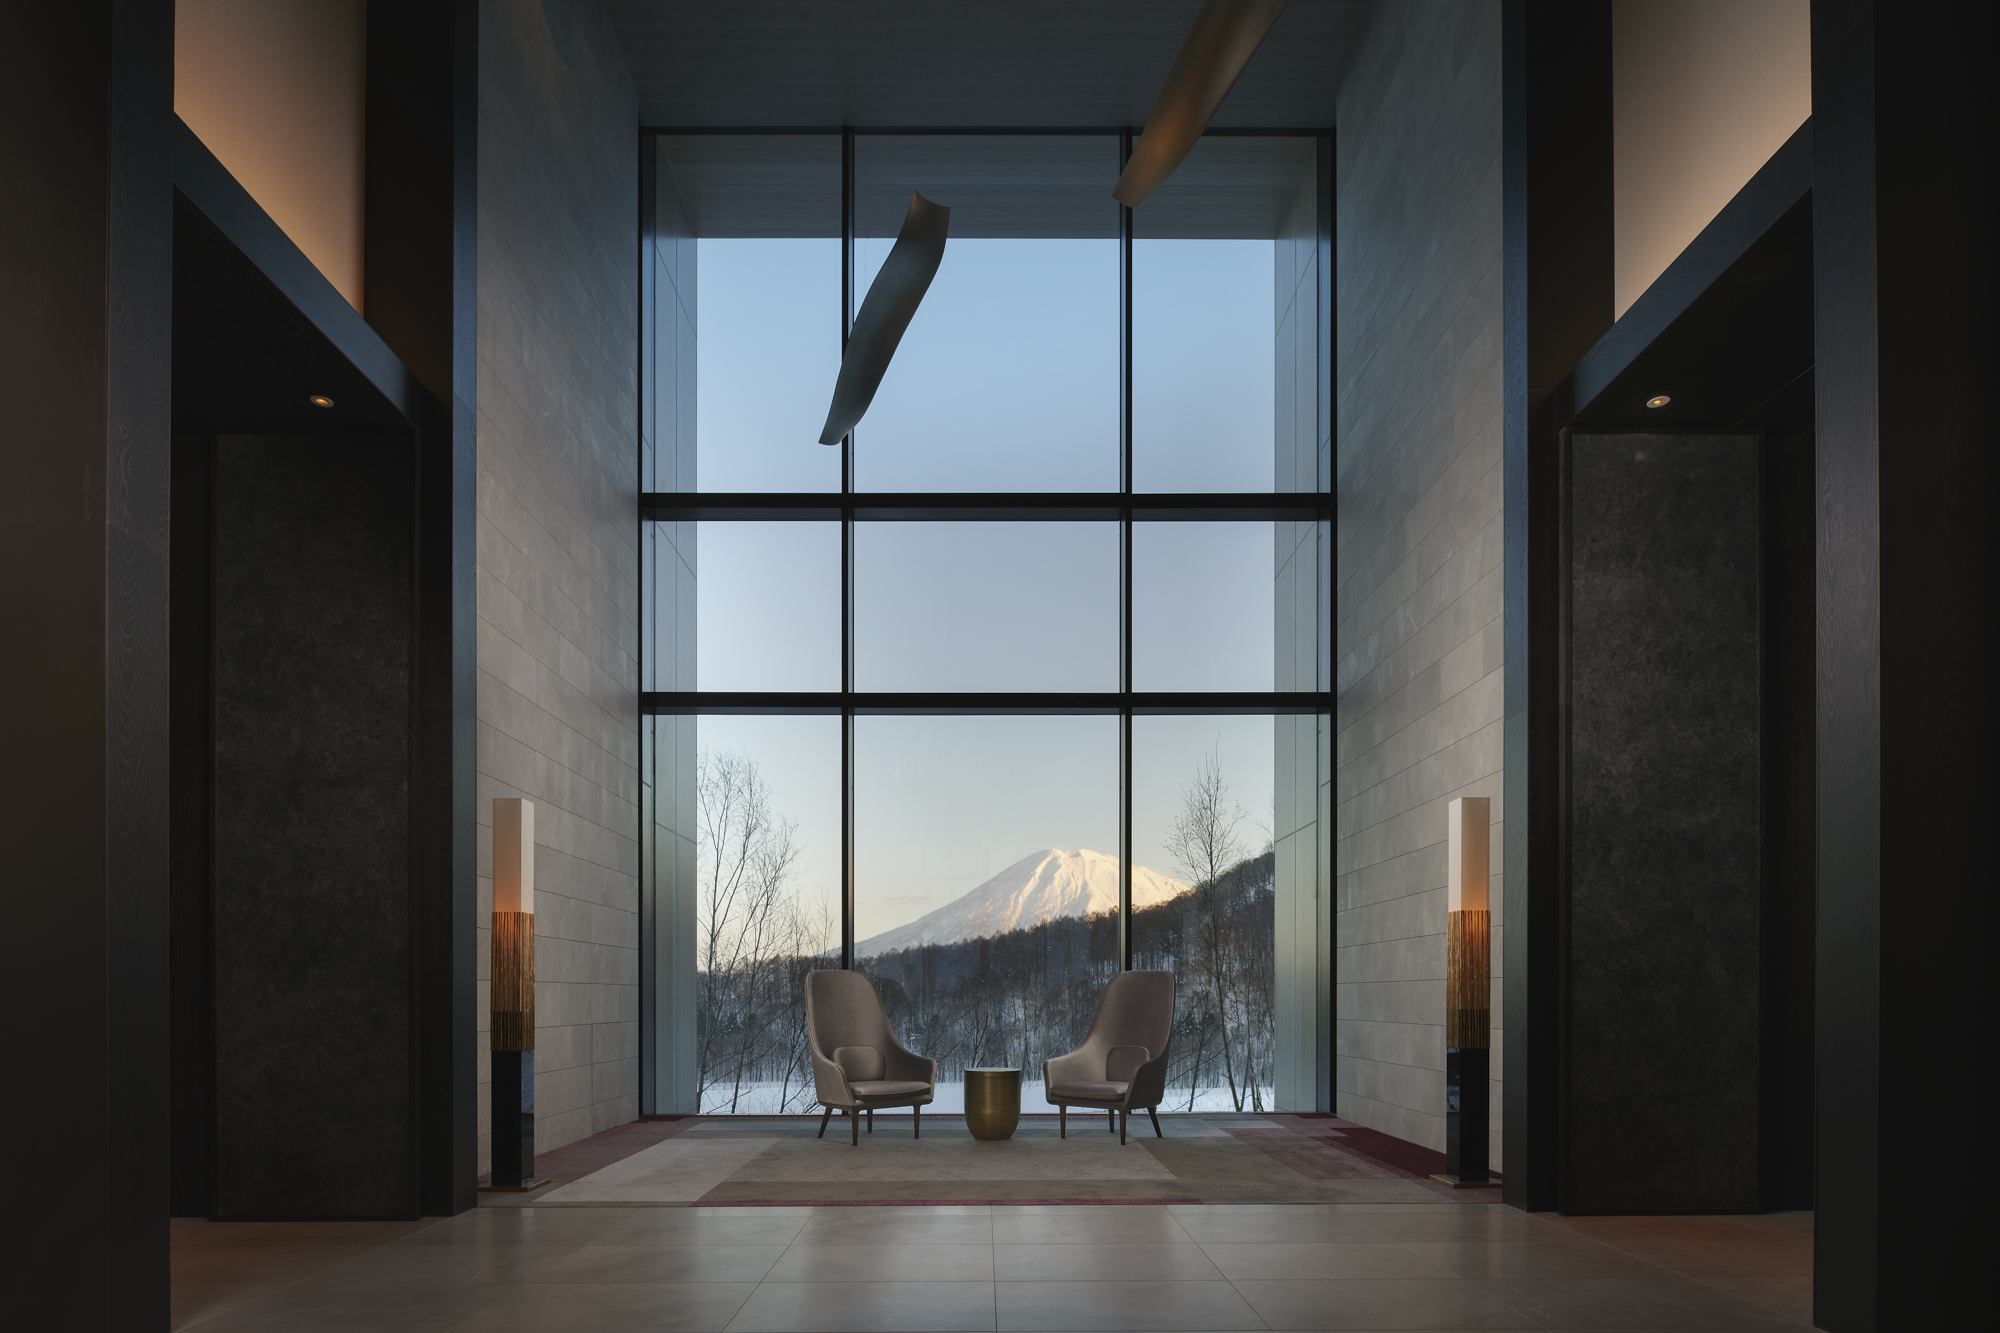 Experience how luxury travel has evolved to make Niseko a world class destination